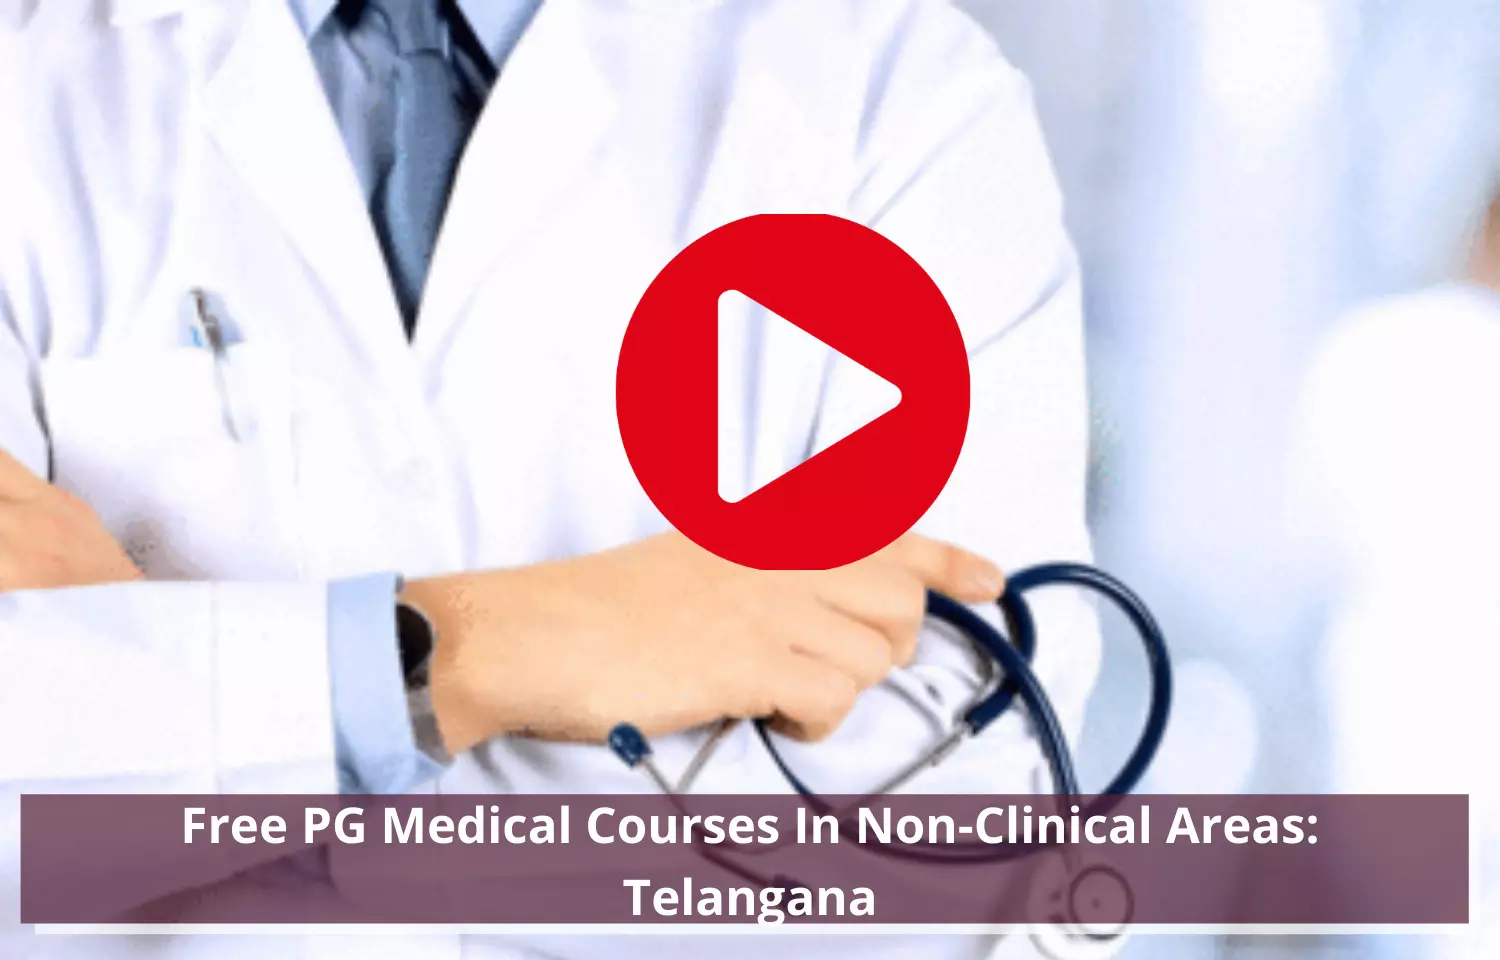 PG medical courses in non-clinical areas for free: Telangana